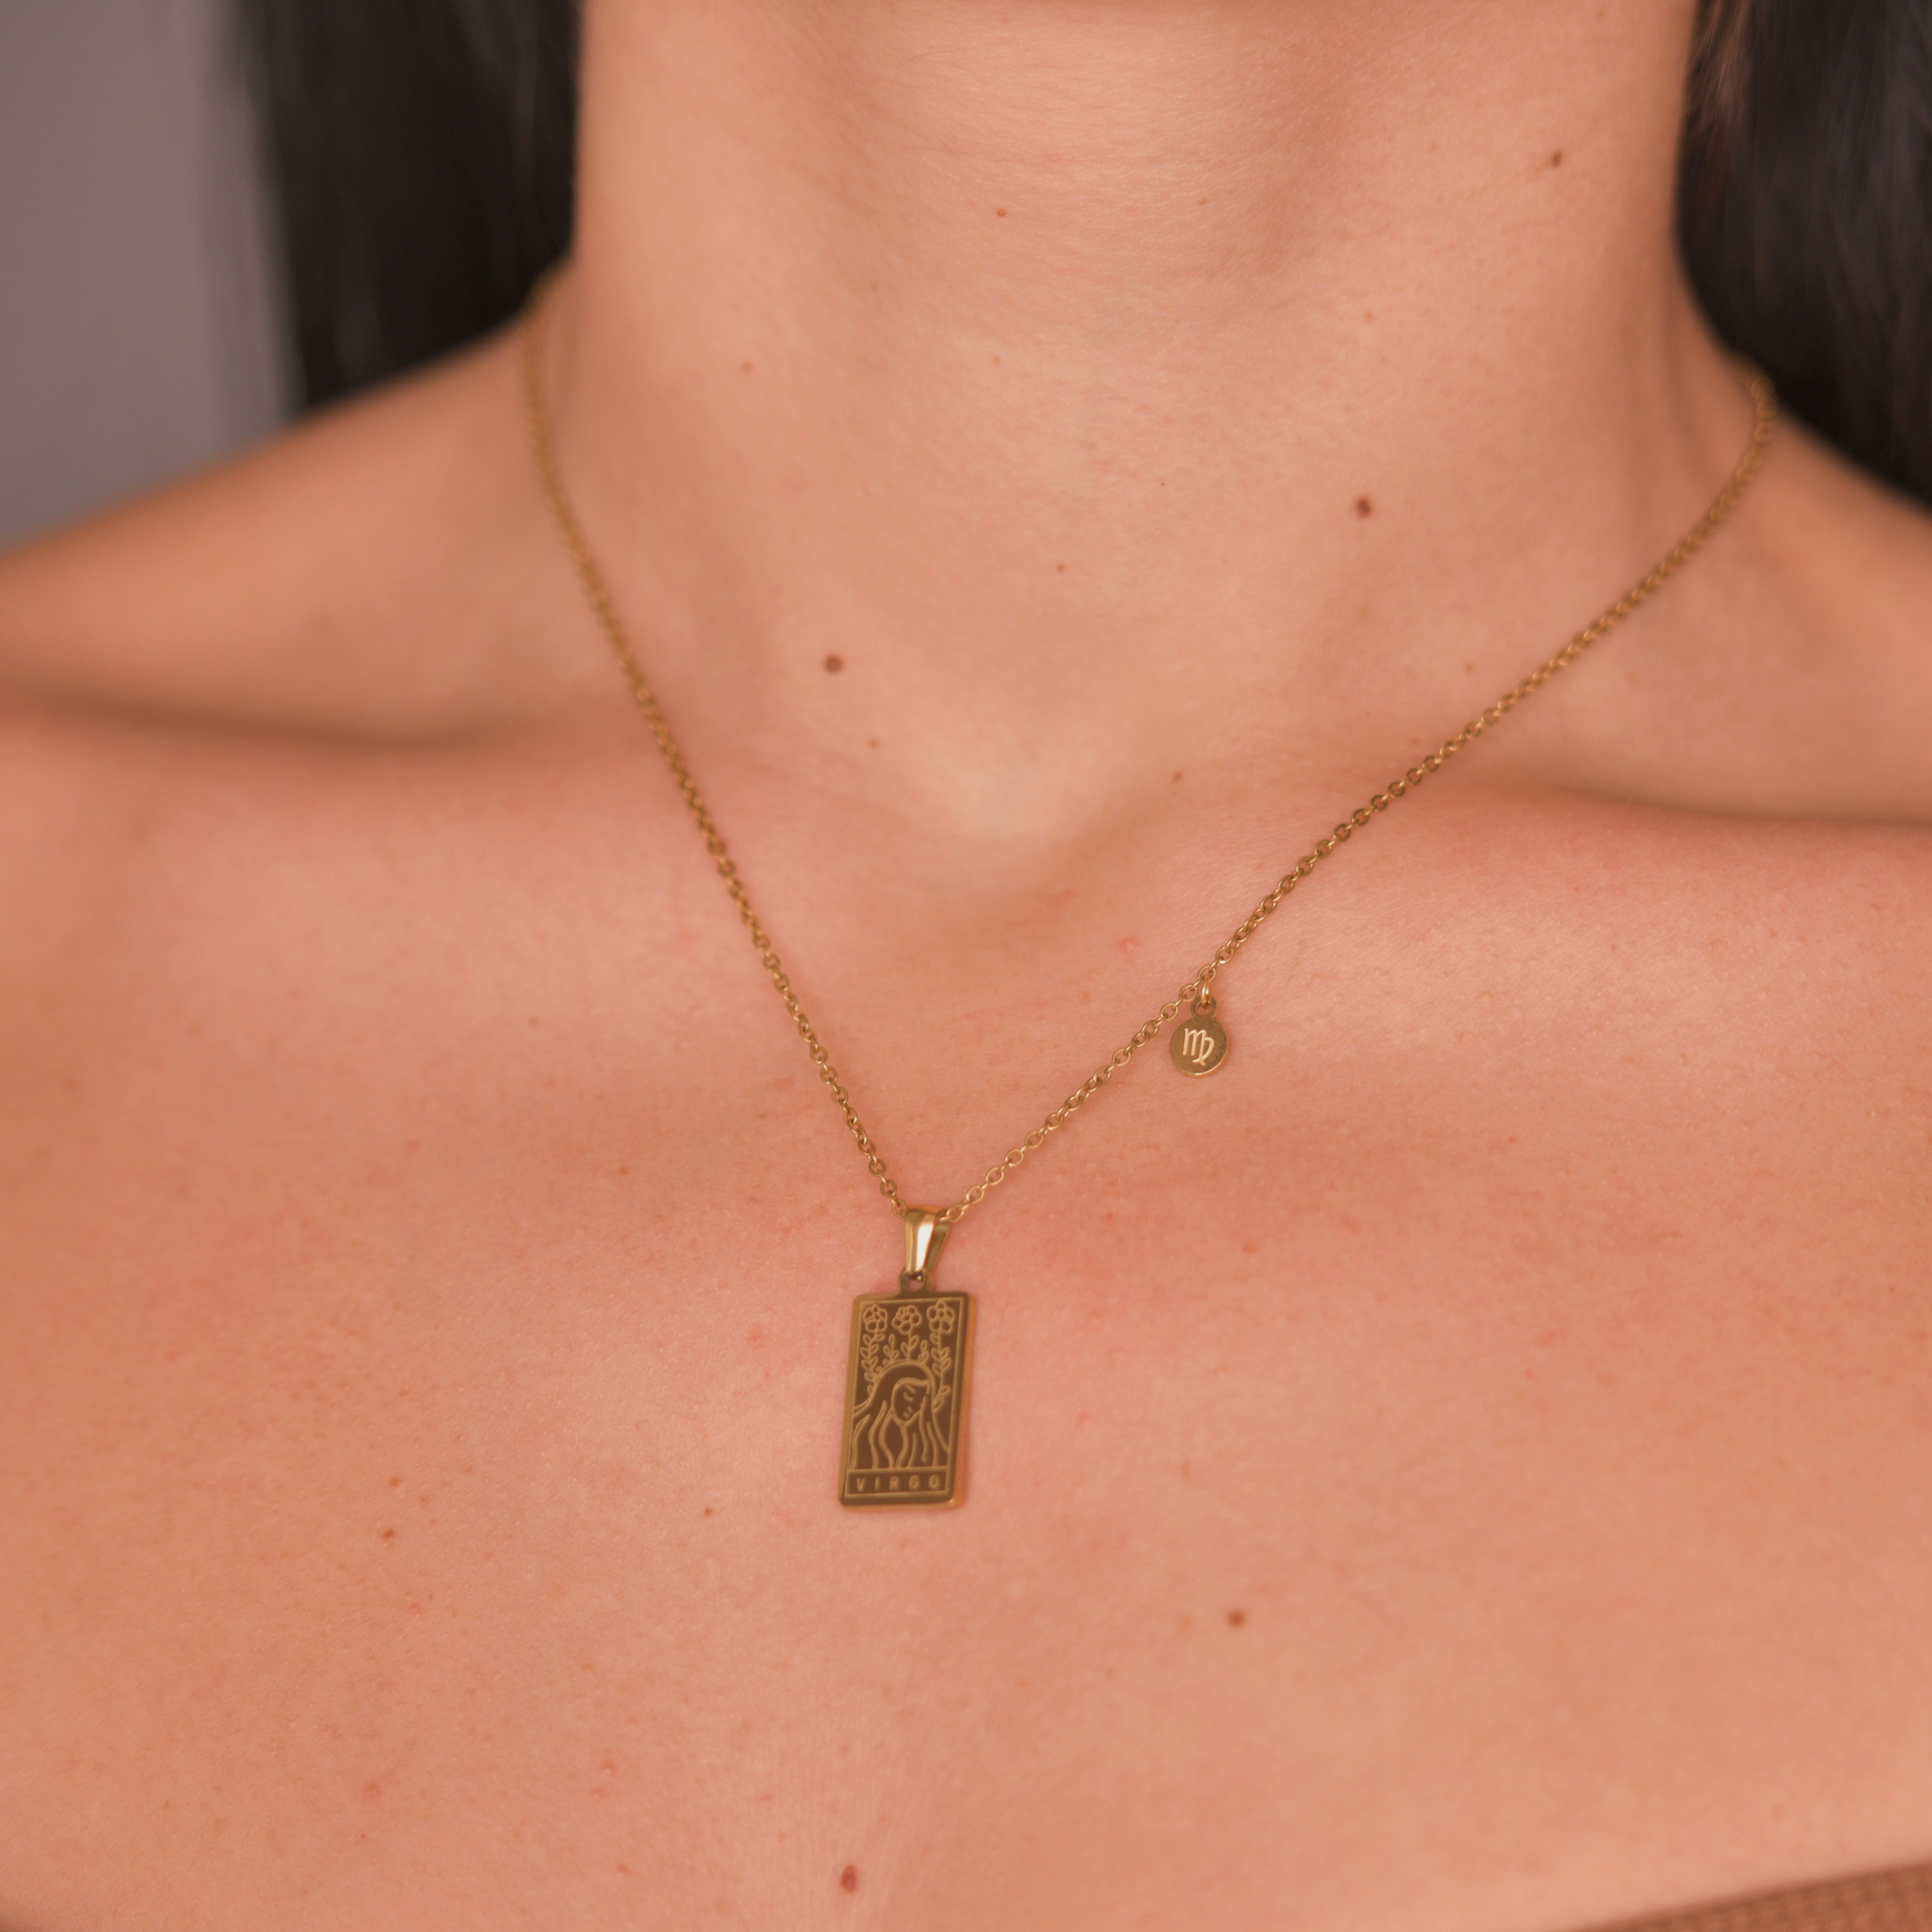 Rectangular gold pendant with a woman engraved representing virgo and the word virgo in the bottom. Gold pendant with a chain necklace. In the side of the gold pendant is a circle small medalion with the symbol of virgo engraved on it. Virgo zodiac pendant gold necklace.